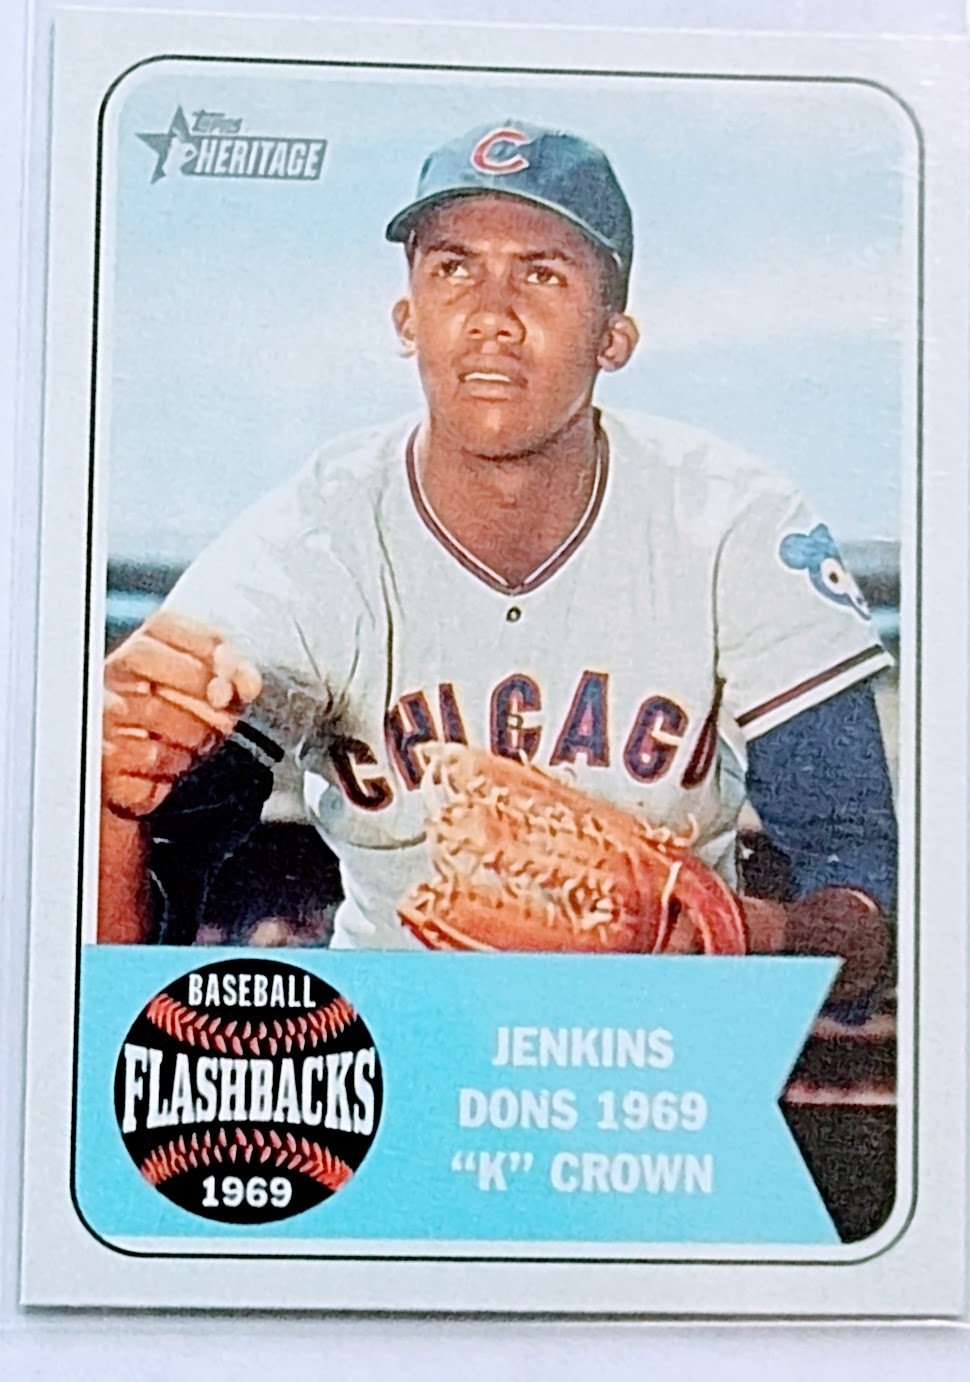 2018 Topps Heritage Fergie Jenkins Don's 1969 "k" Crown Flashbacks Insert Baseball Card TPTV simple Xclusive Collectibles   